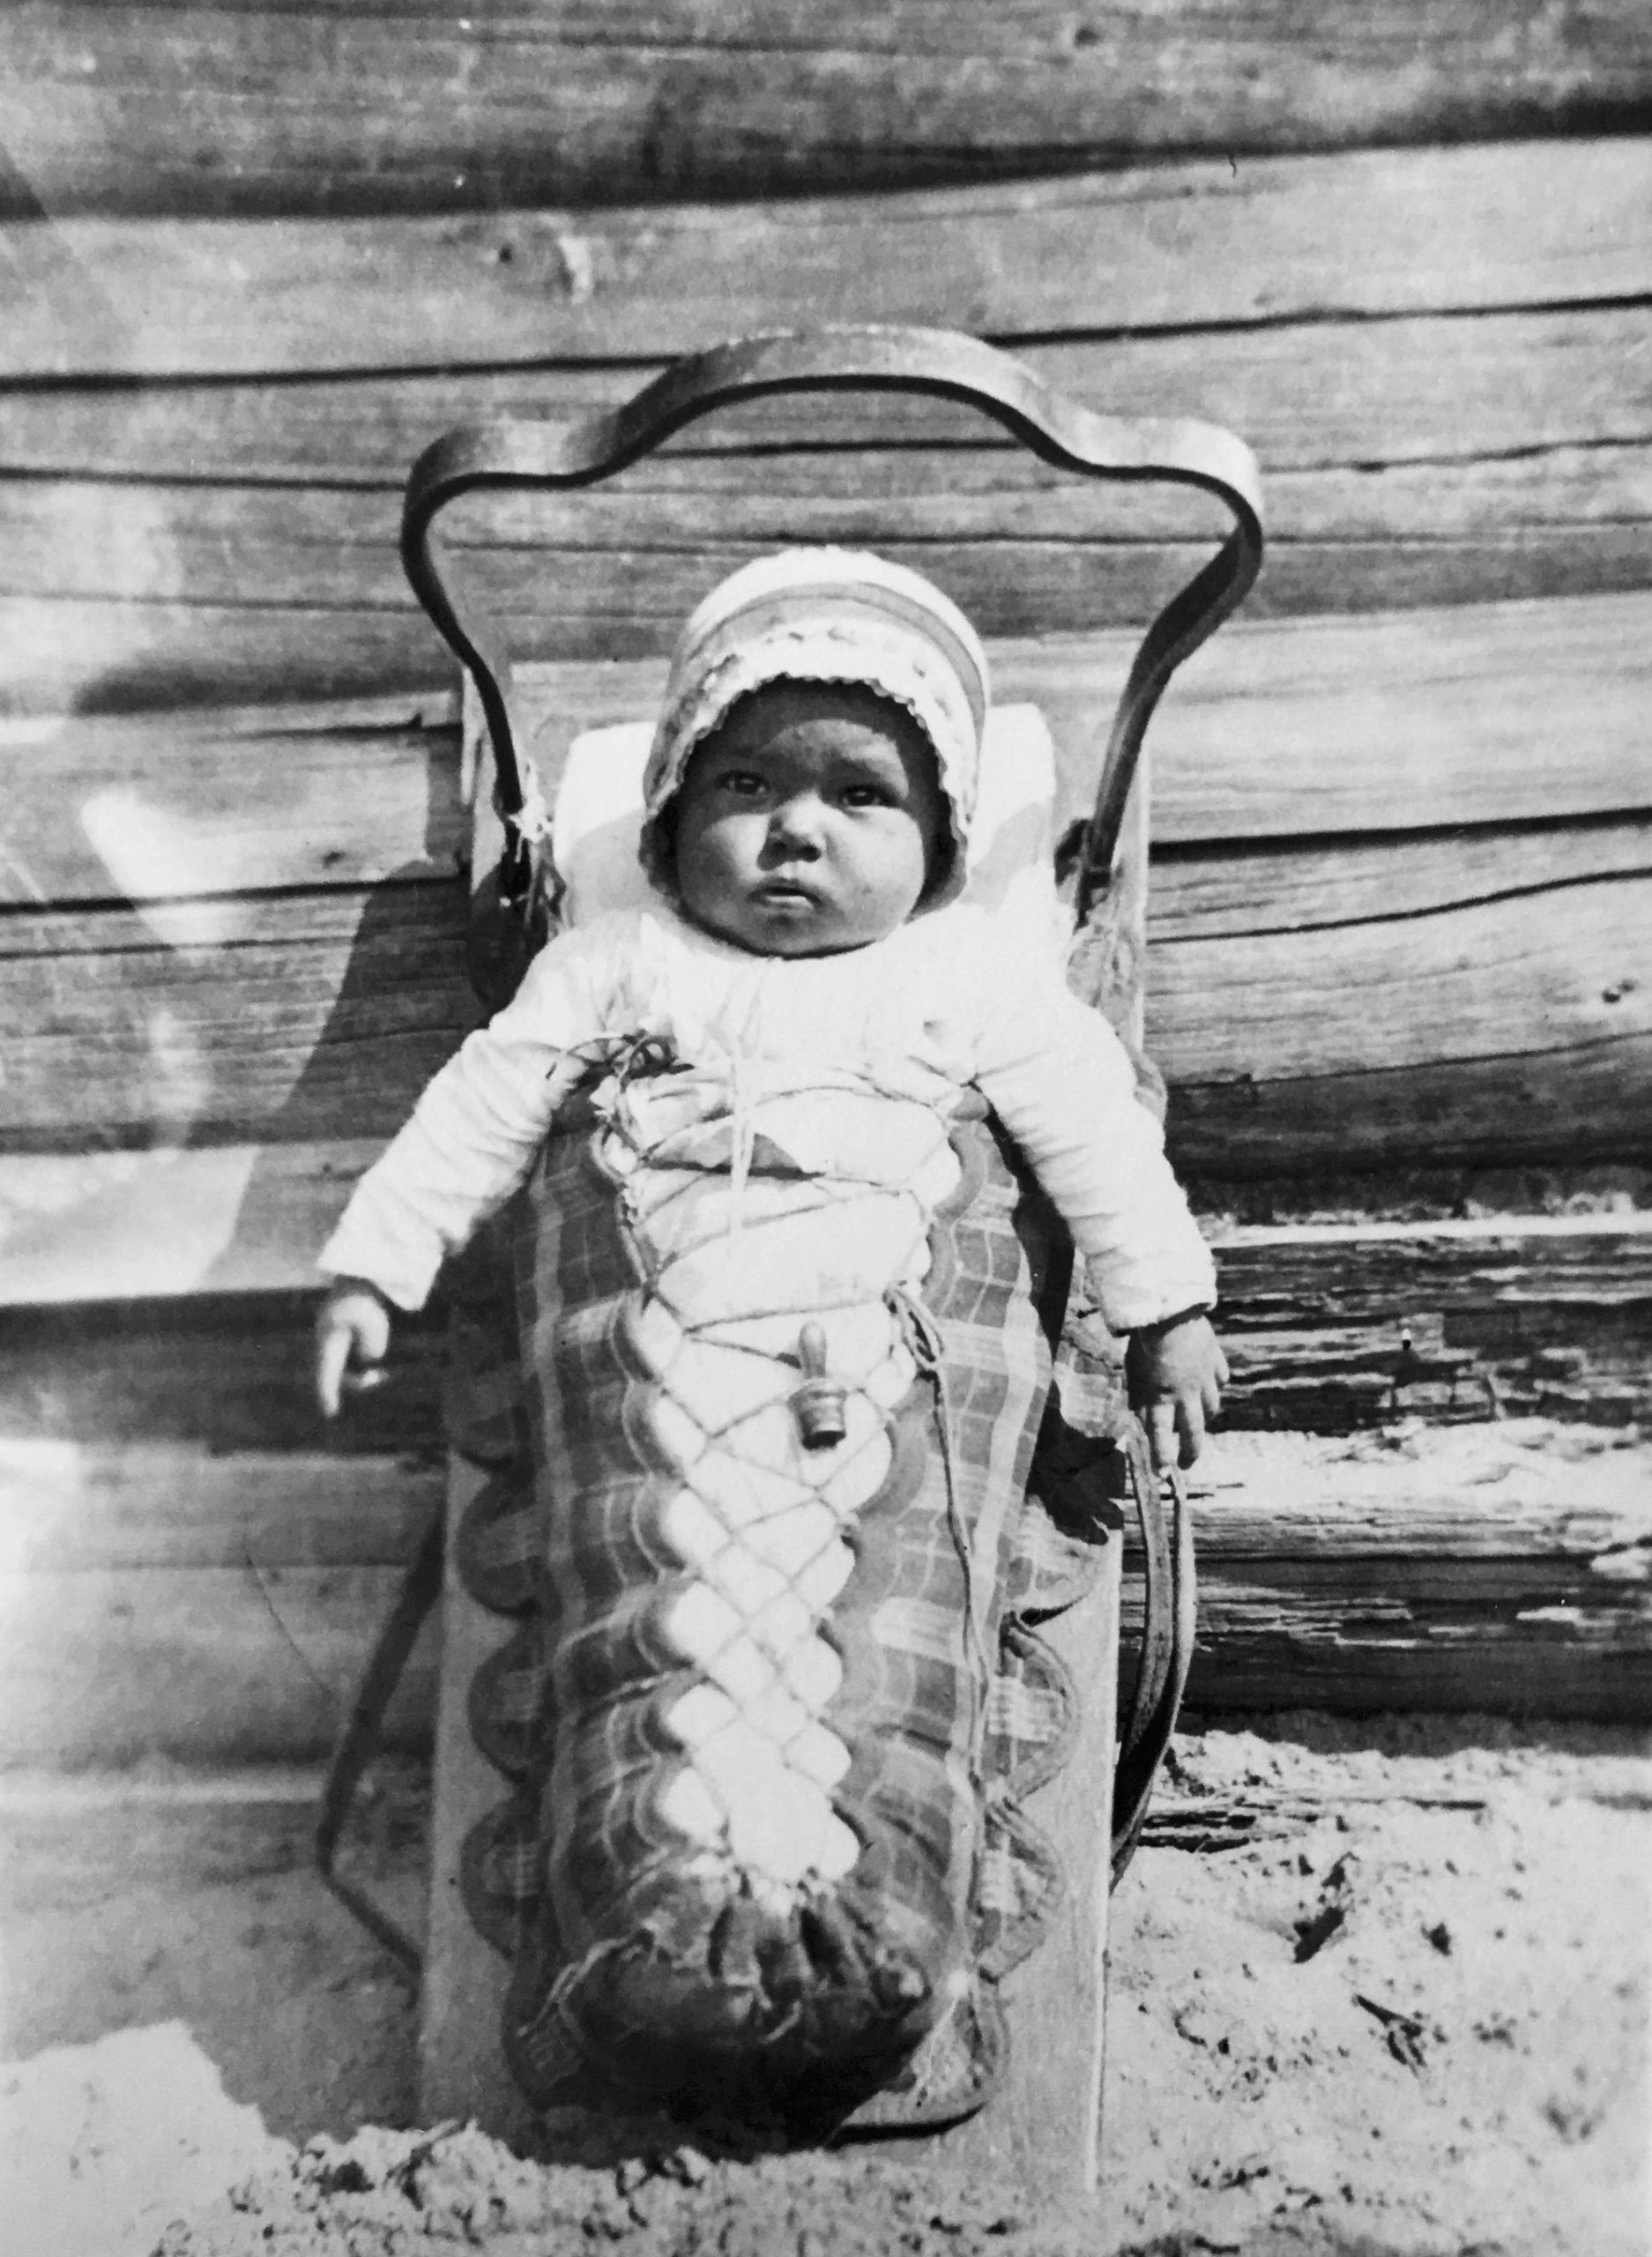 A baby in his baby carrier (tikinagan). He is wearing a hat. His arms are out of the swaddled portion. The baby carrier is placed vertically and is leaning against the wall which allows a baby to see around him. Black and white picture.